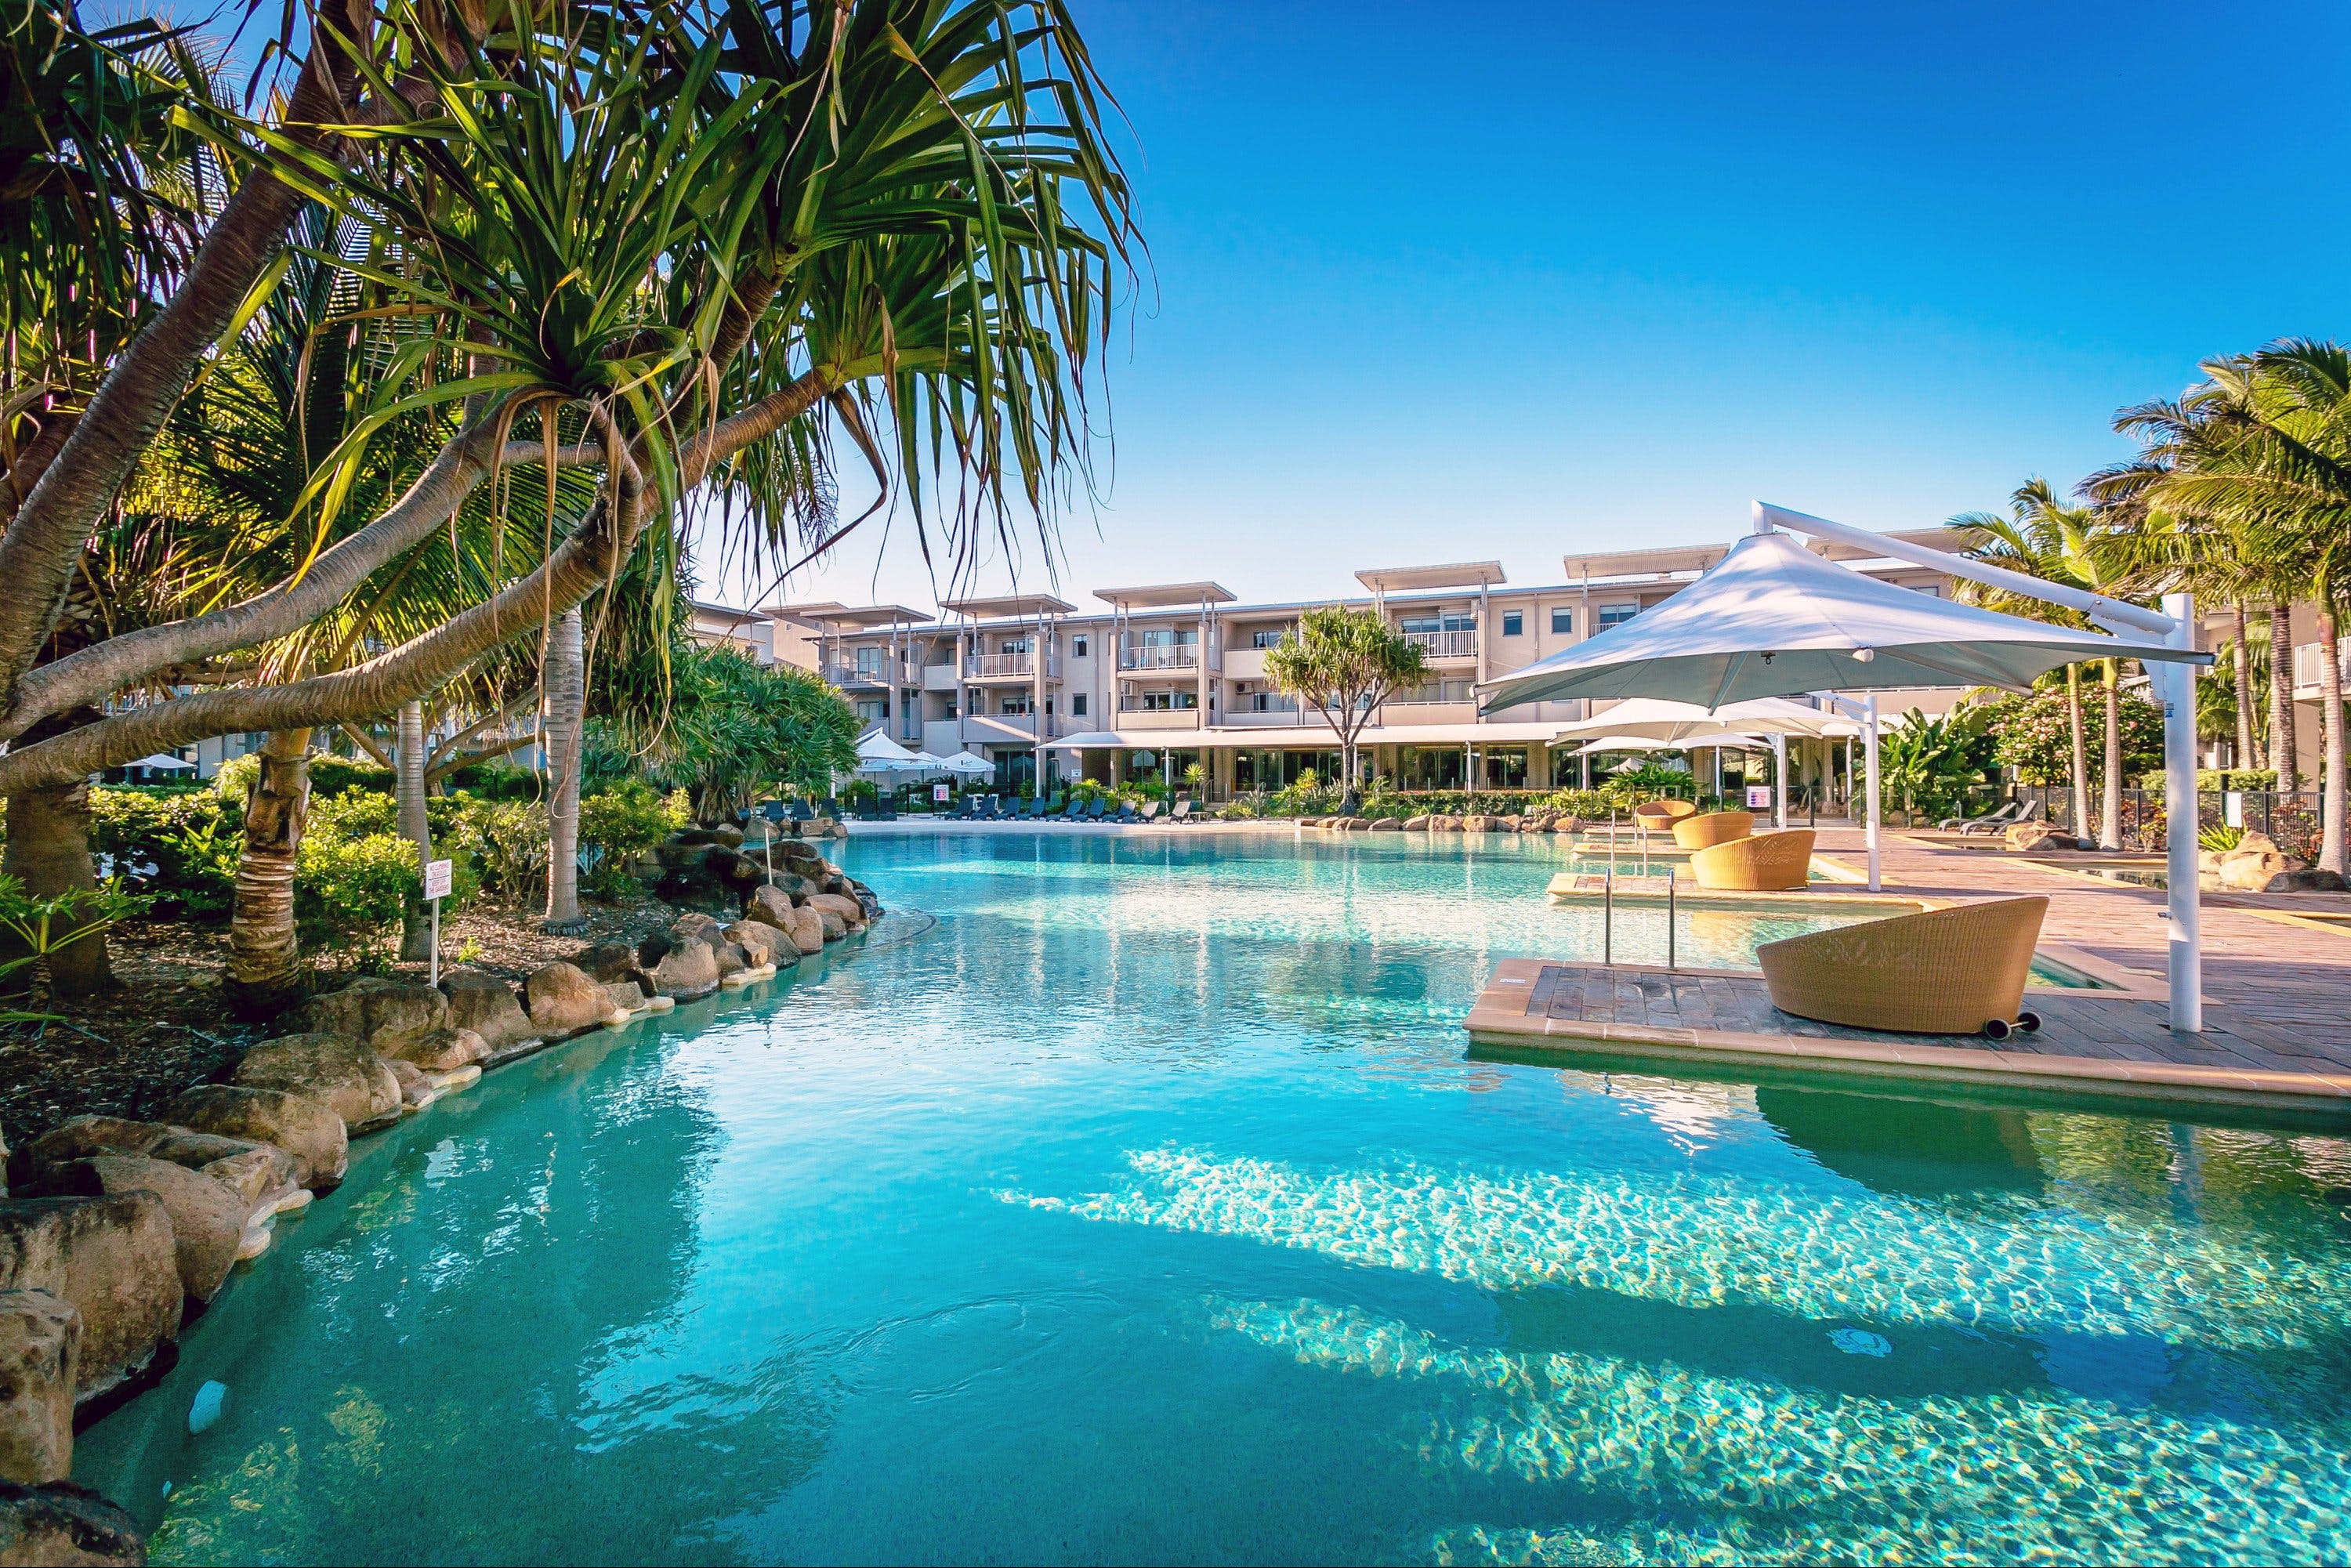 Peppers Salt Resort and Spa - Hervey Bay Accommodation